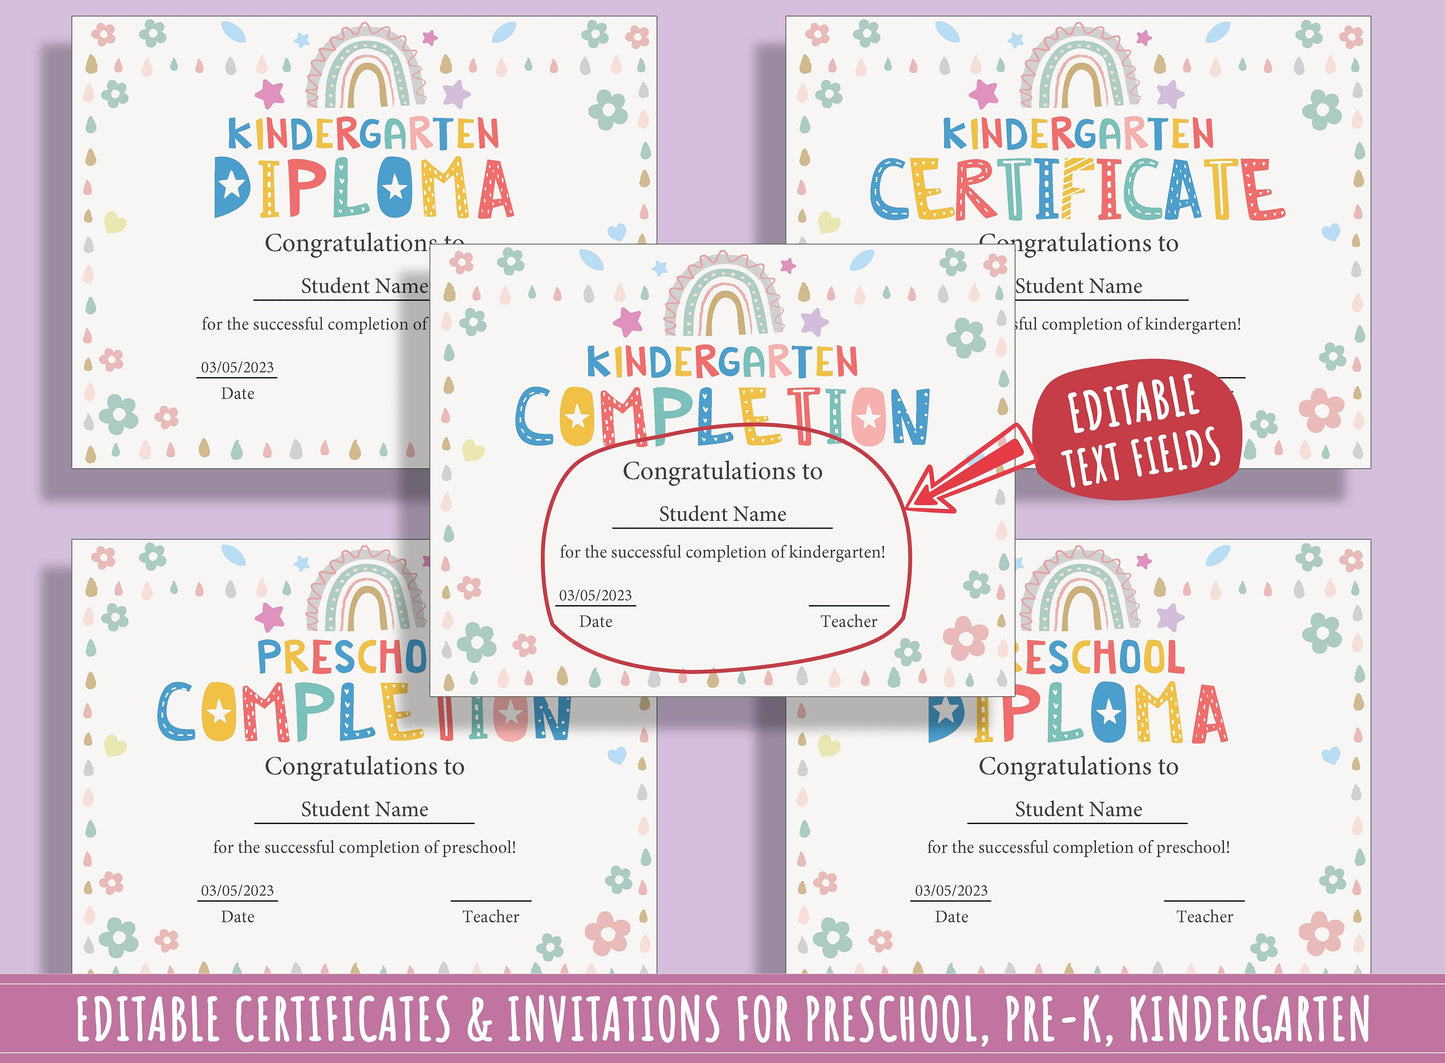 Diploma, Certificate, and Invitation Templates for Kindergarten and Preschool Graduation: A Colorful Rainbow Theme, 37 Editable Pages, PDF